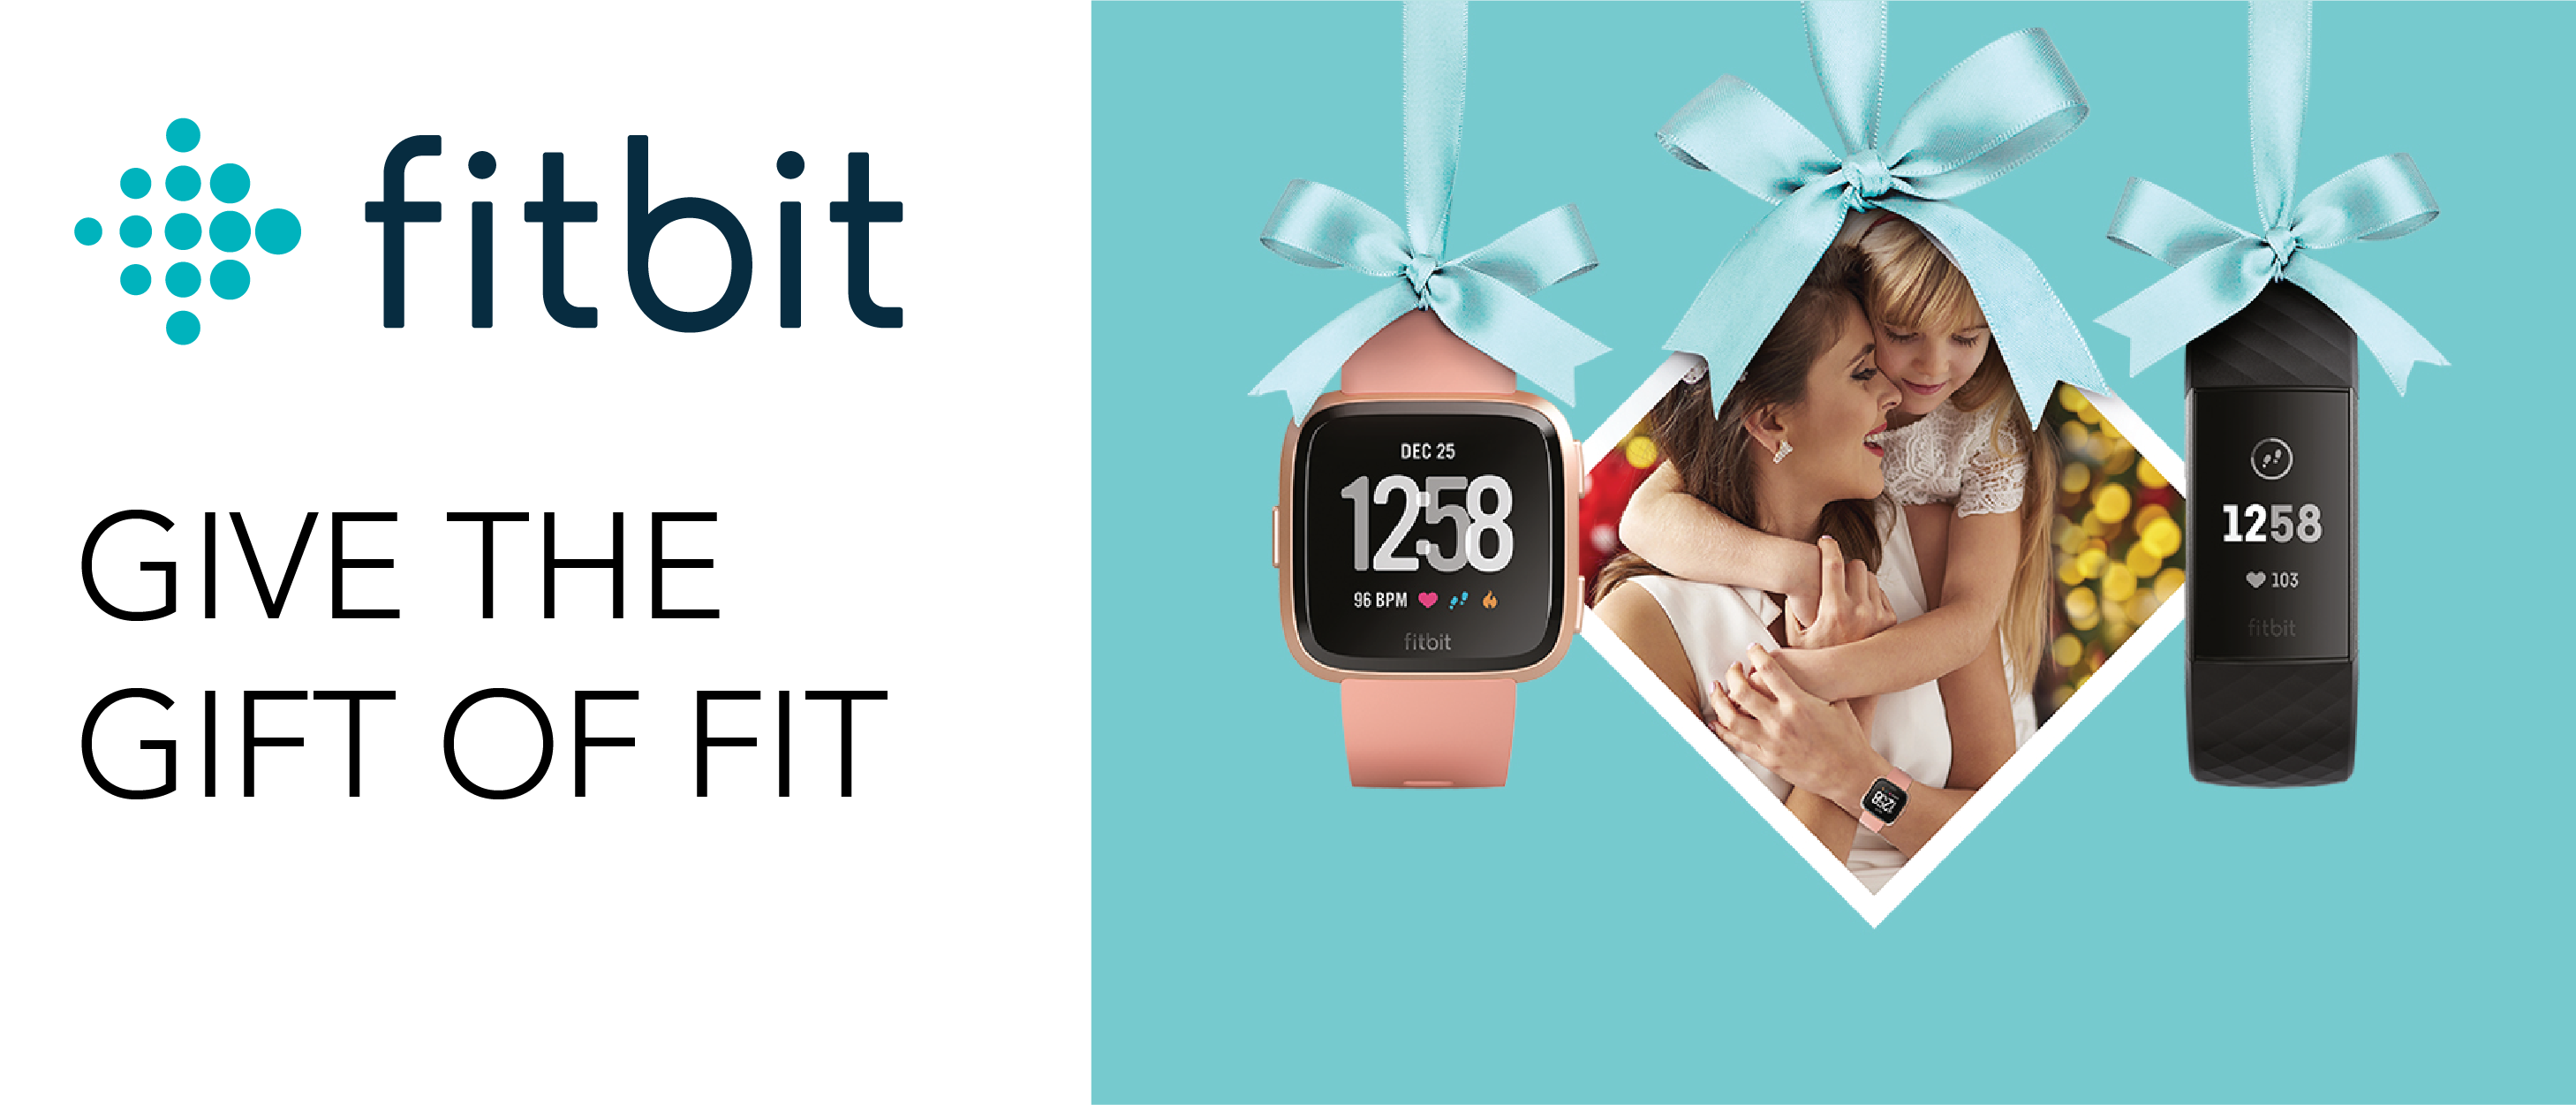 GIVE THE GIFT OF FIT